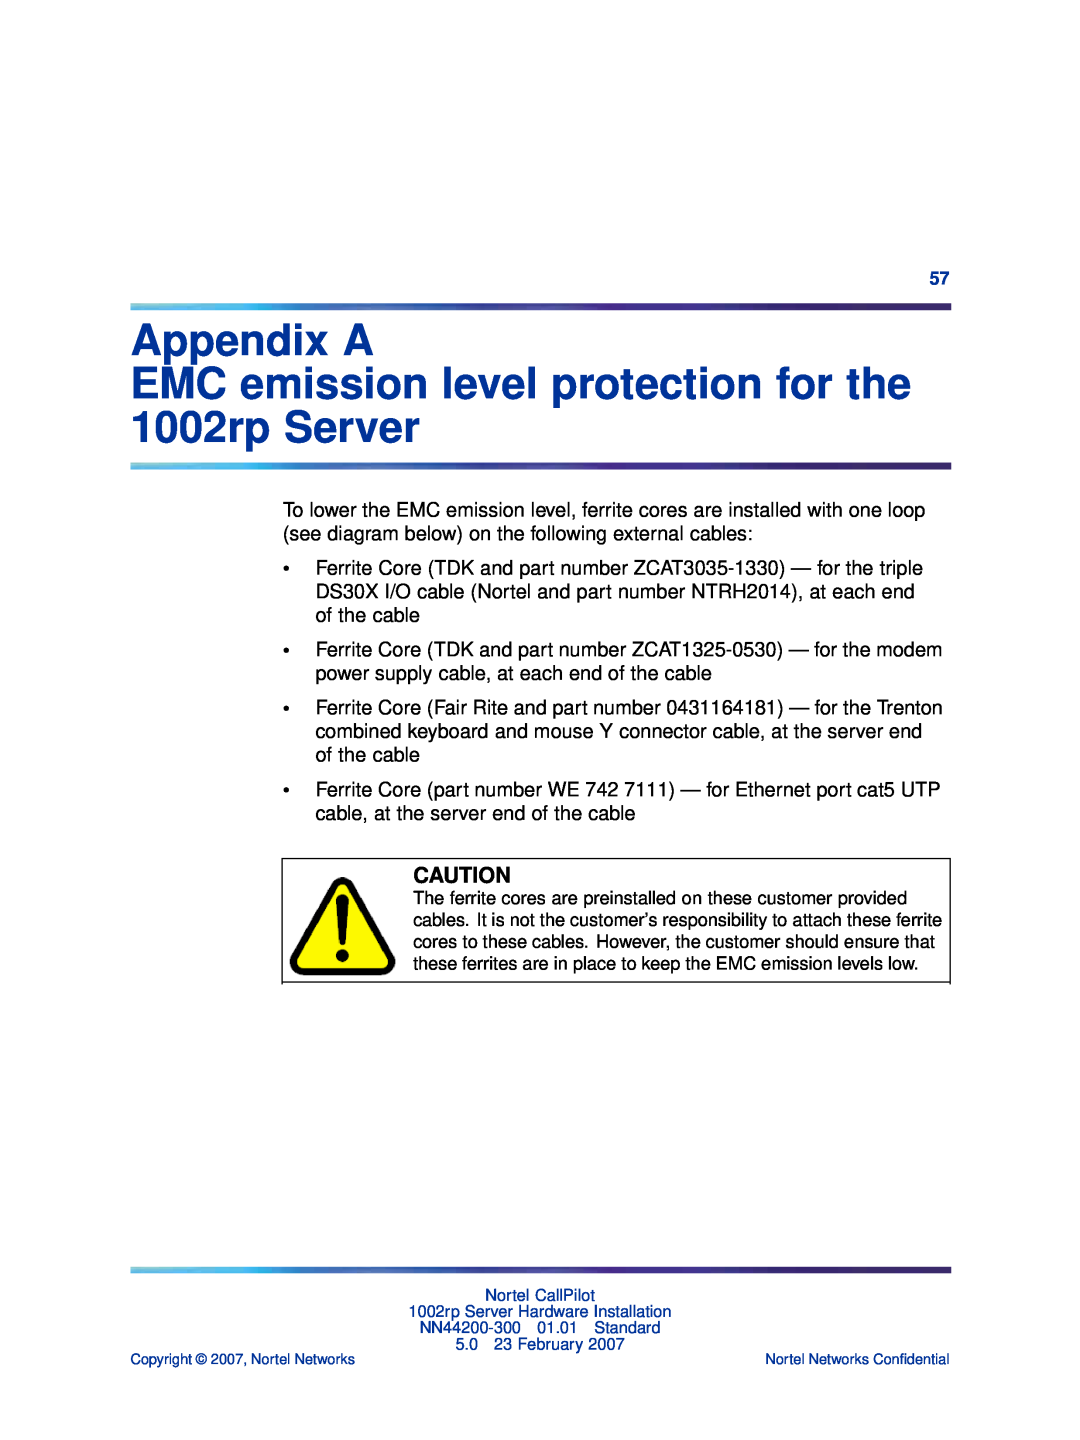 Nortel Networks NN44200-300 manual Appendix A EMC emission level protection for the 1002rp Server 